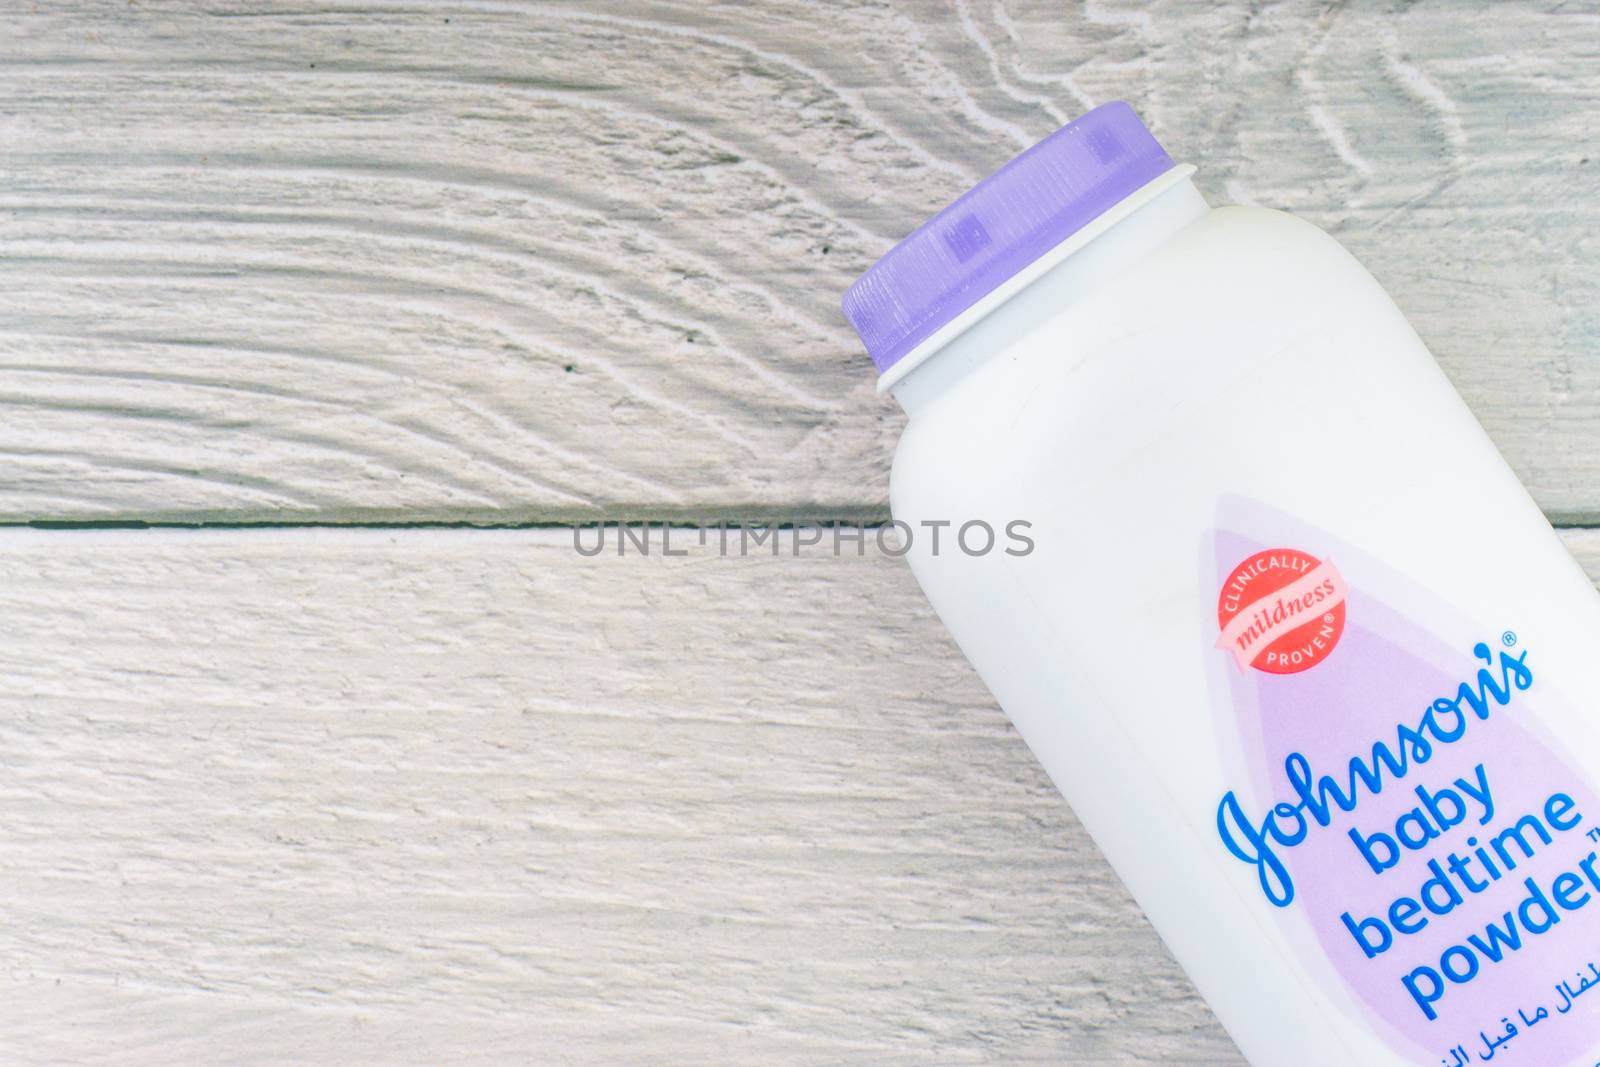 Kuala Lumpur, Malaysia - October 19, 2020 : Johnson and Johnson Baby bedtime powder talcum on wooden background by silverwings